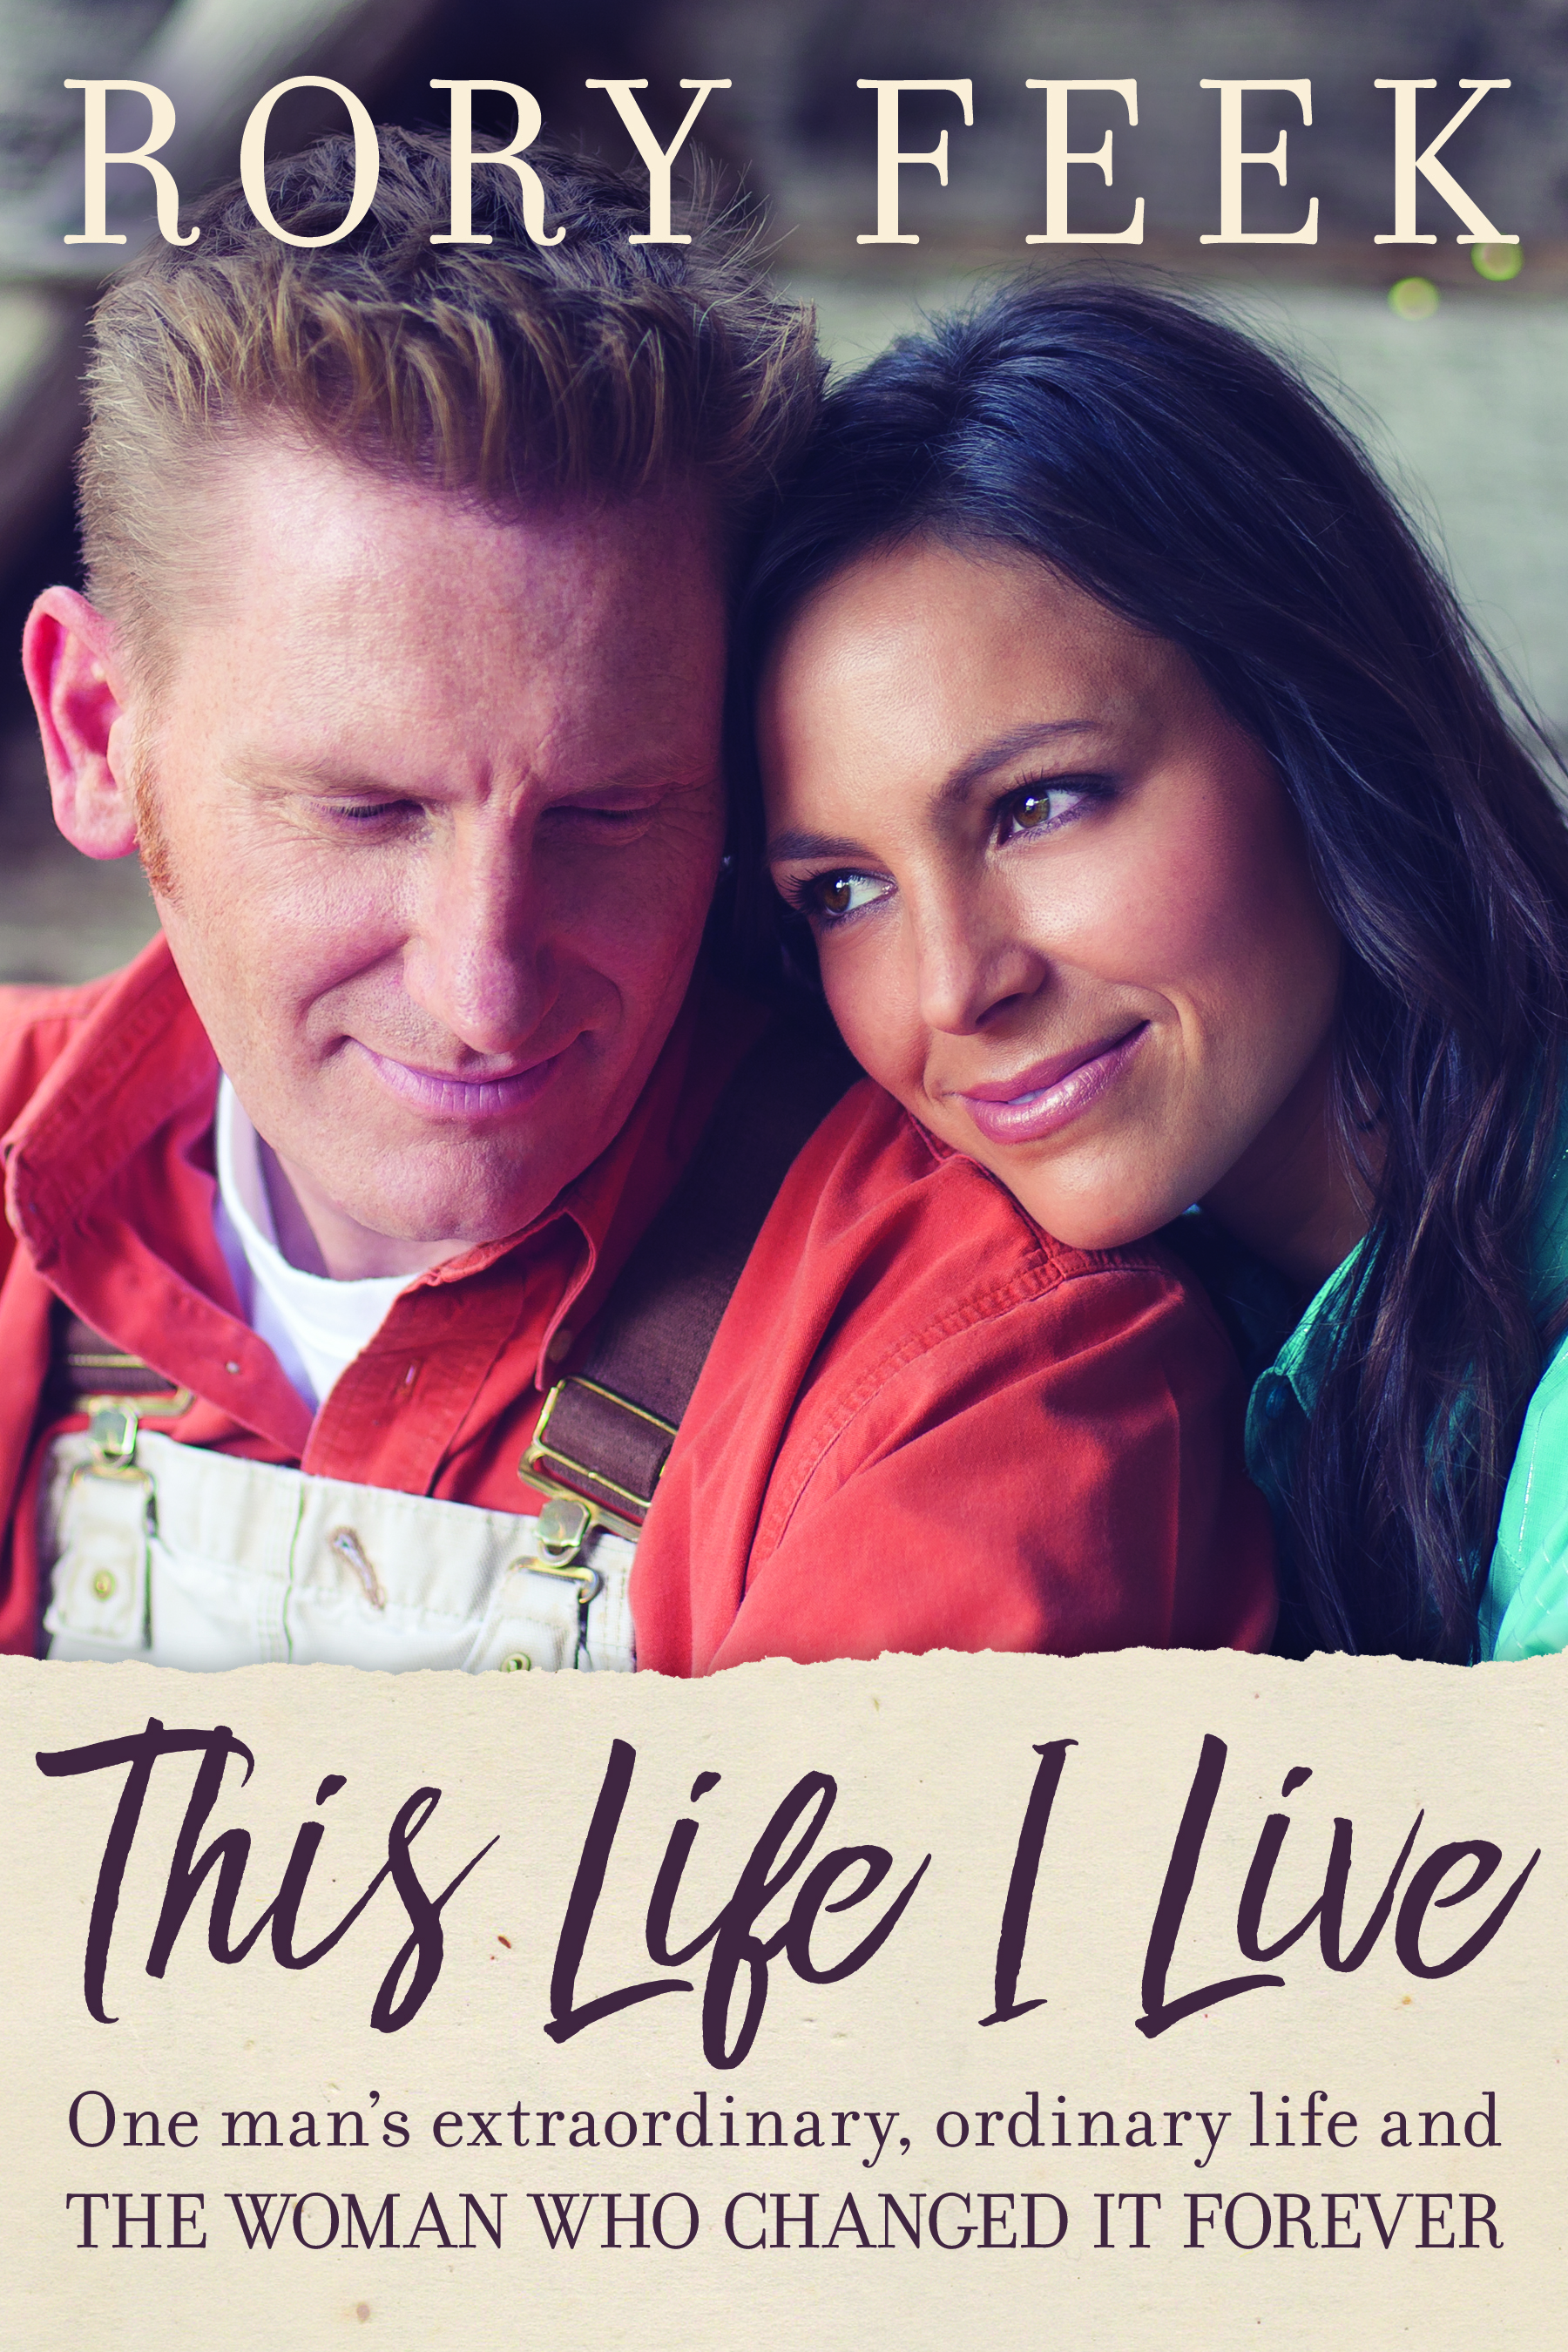 This Life I Live by Rory Feek - One man's extraordinary, ordinary life and the woman who changed it forever.